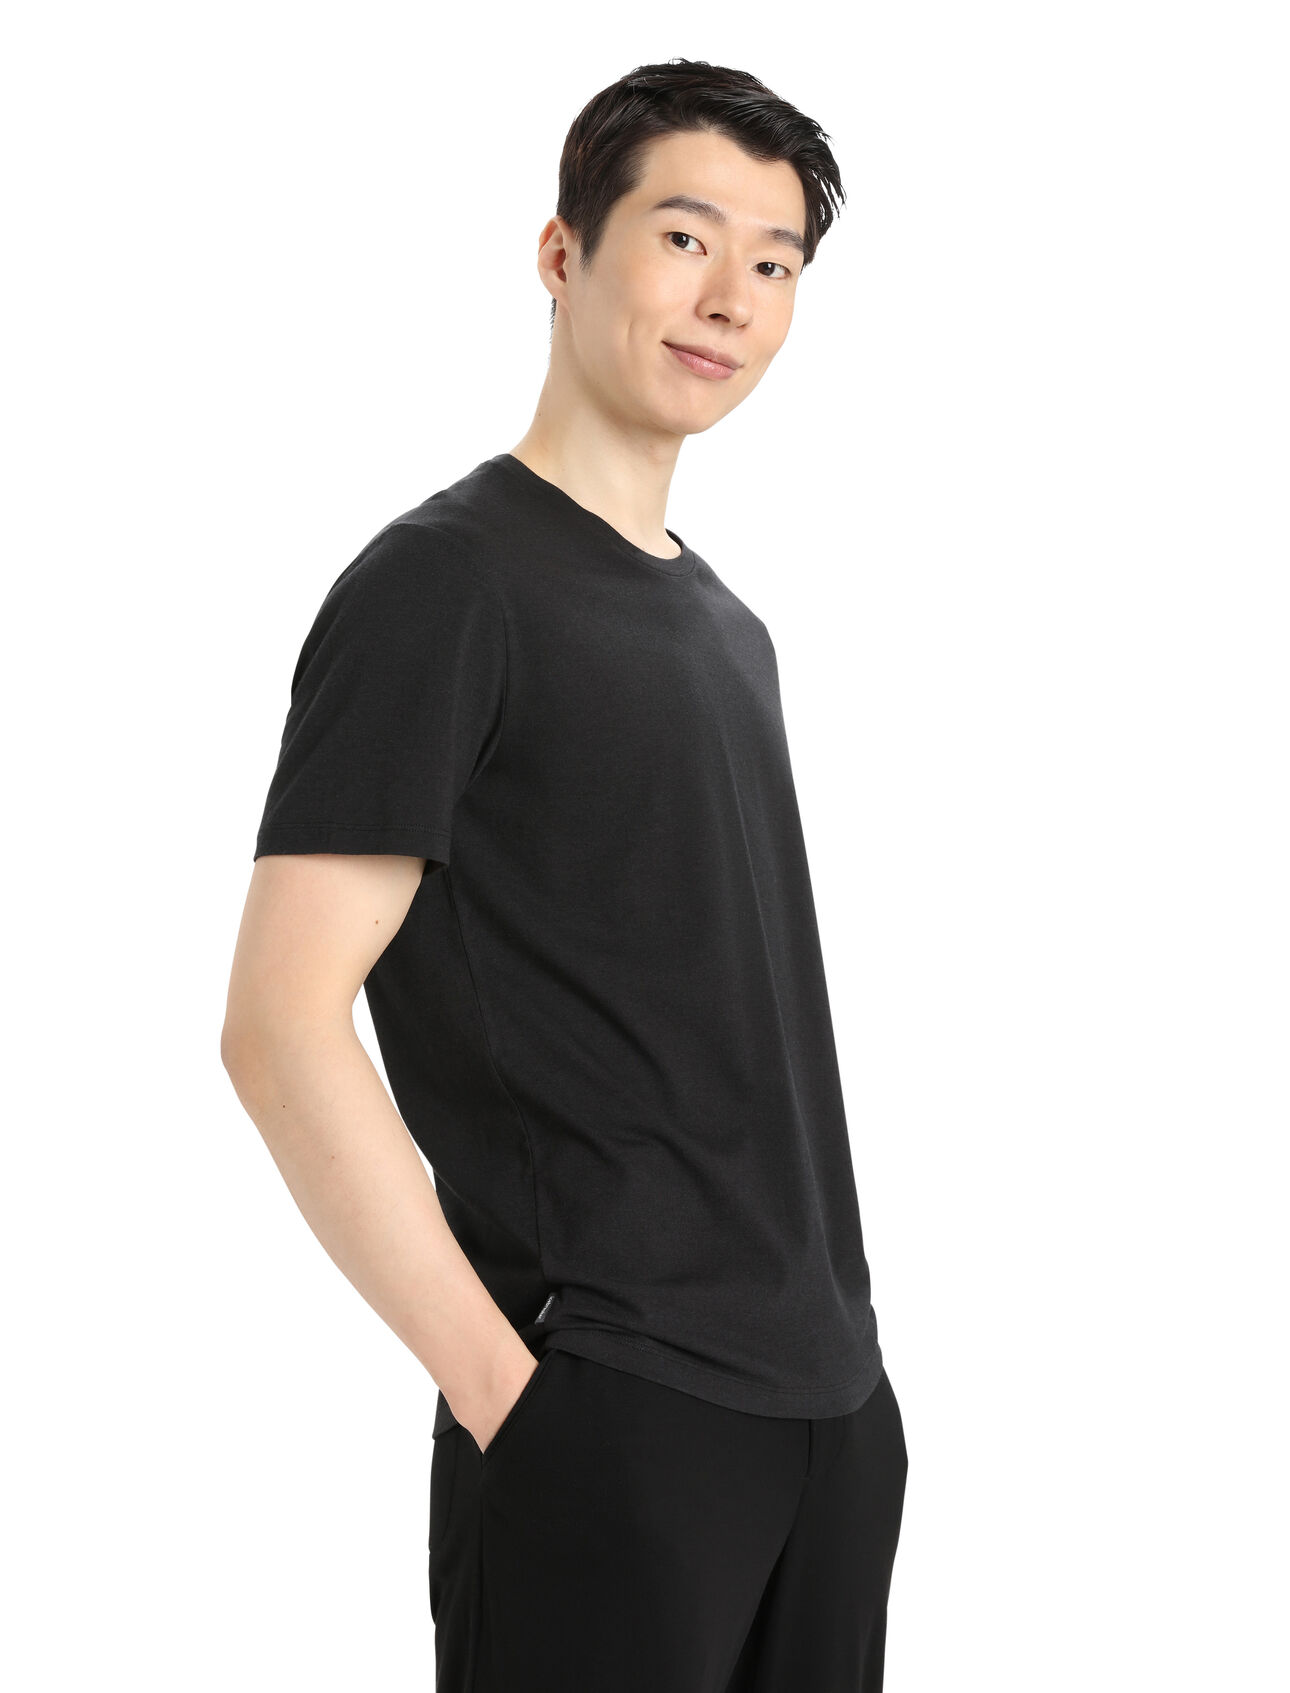 Mens Merino Blend Central T-Shirt A versatile, everyday tee that goes anywhere in comfort, the Central Classic Short Sleeve Tee features a sustainable blend of natural merino wool and soft organically grown cotton.